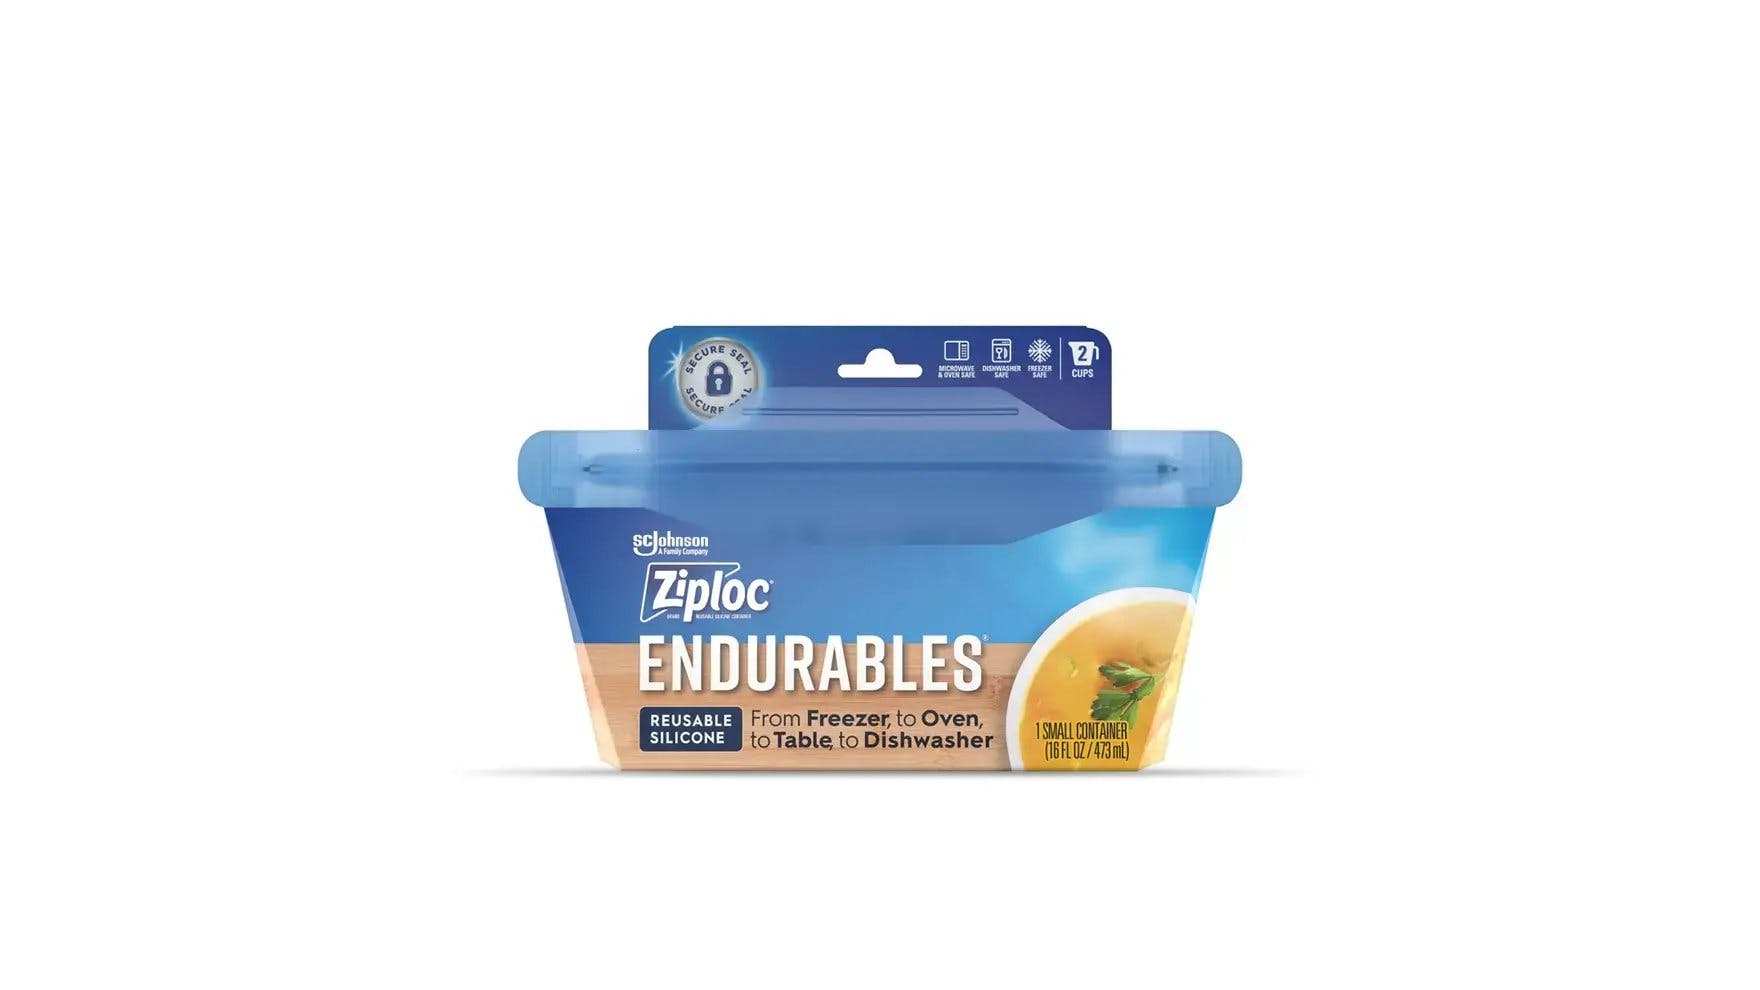  Ziploc Endurables Silicone Food Storage Meal Prep Containers,  Microwave Safe and Eco-Friendly, Medium Container, 1 Count : Home & Kitchen